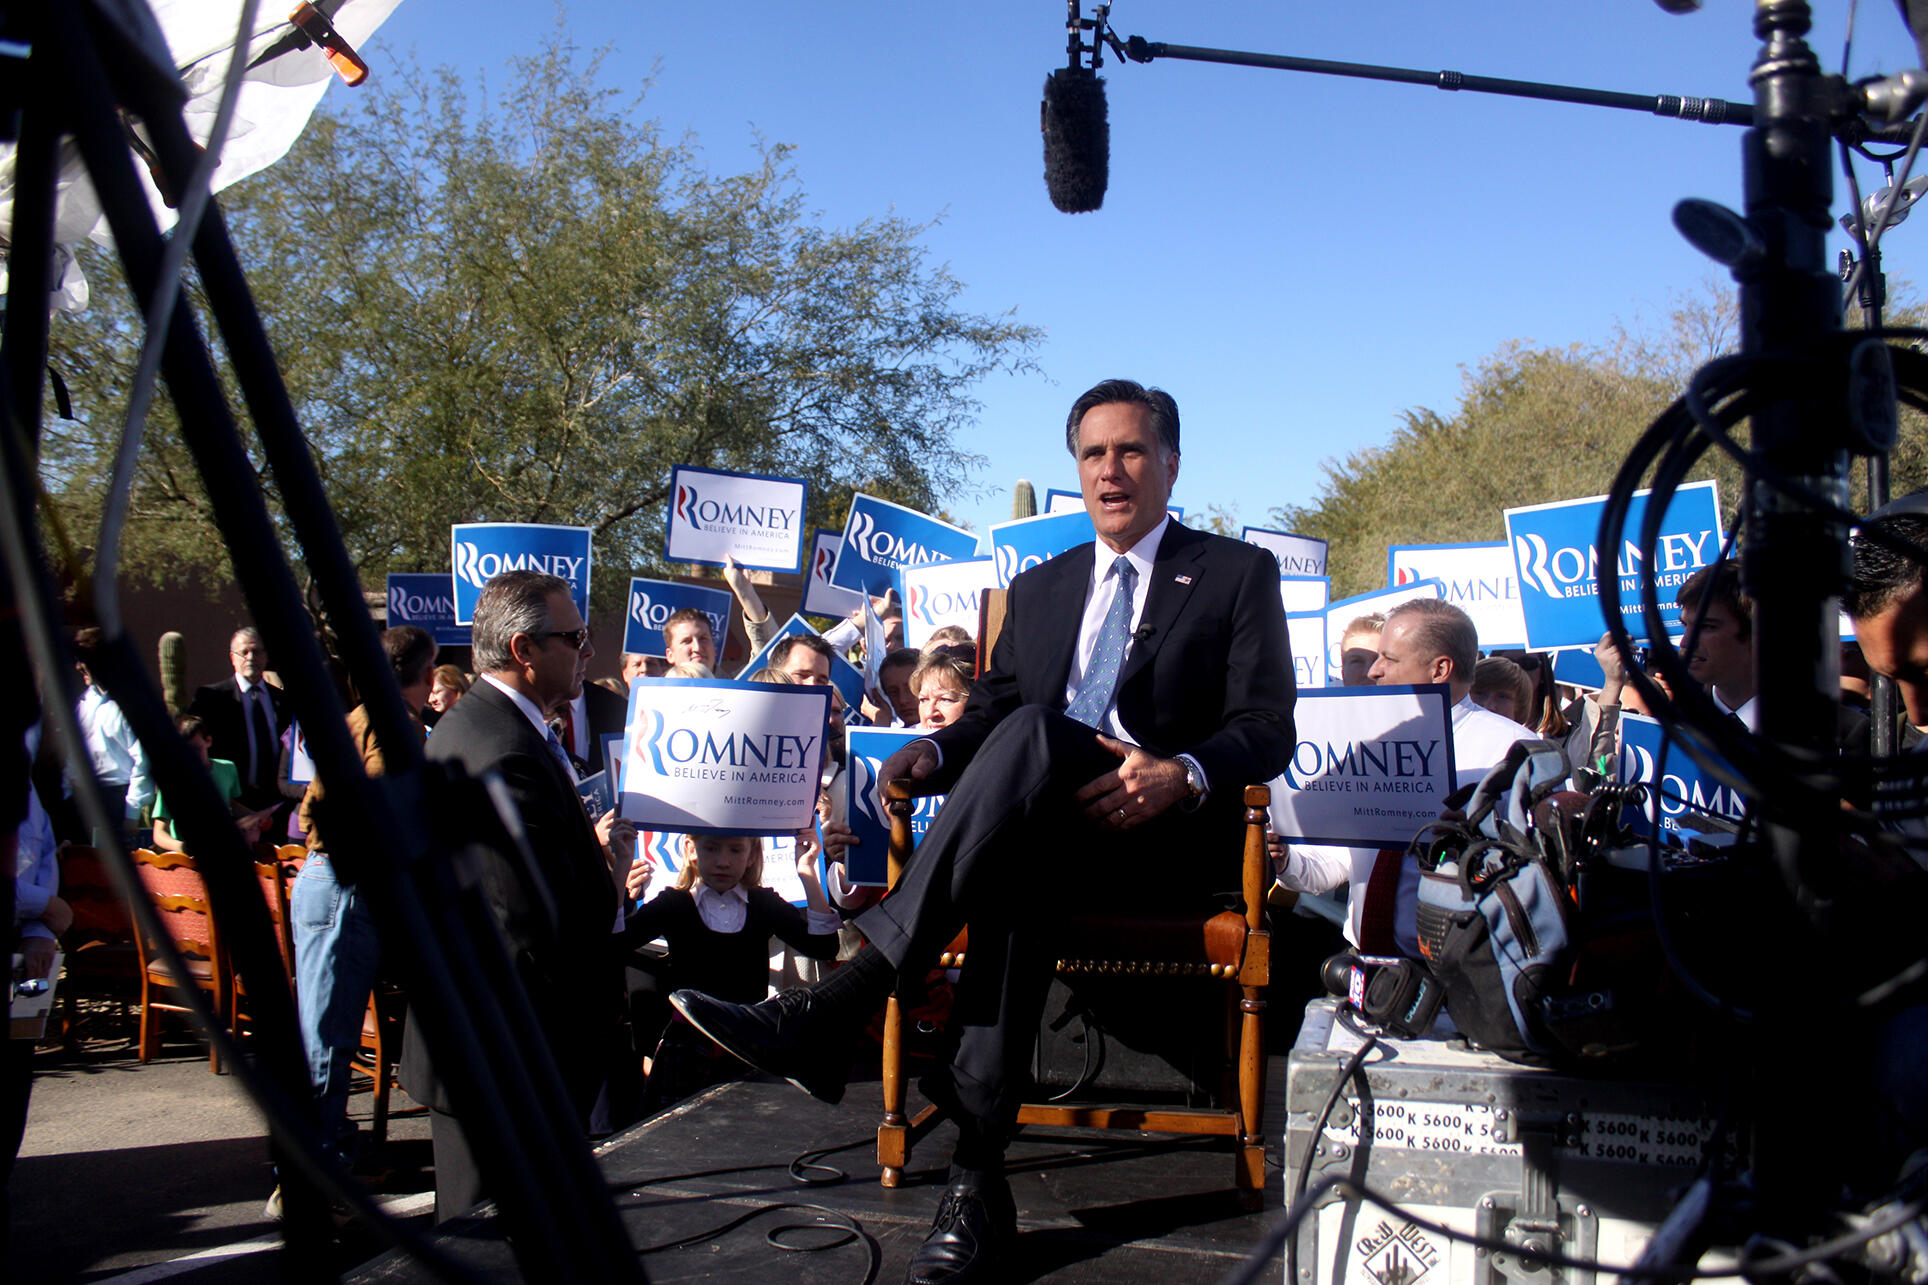 Mitt Romney gives an interview on stage in 2012 at a rally in Paradise Valley, Arizona. (Photo by Gage Skidmore.)